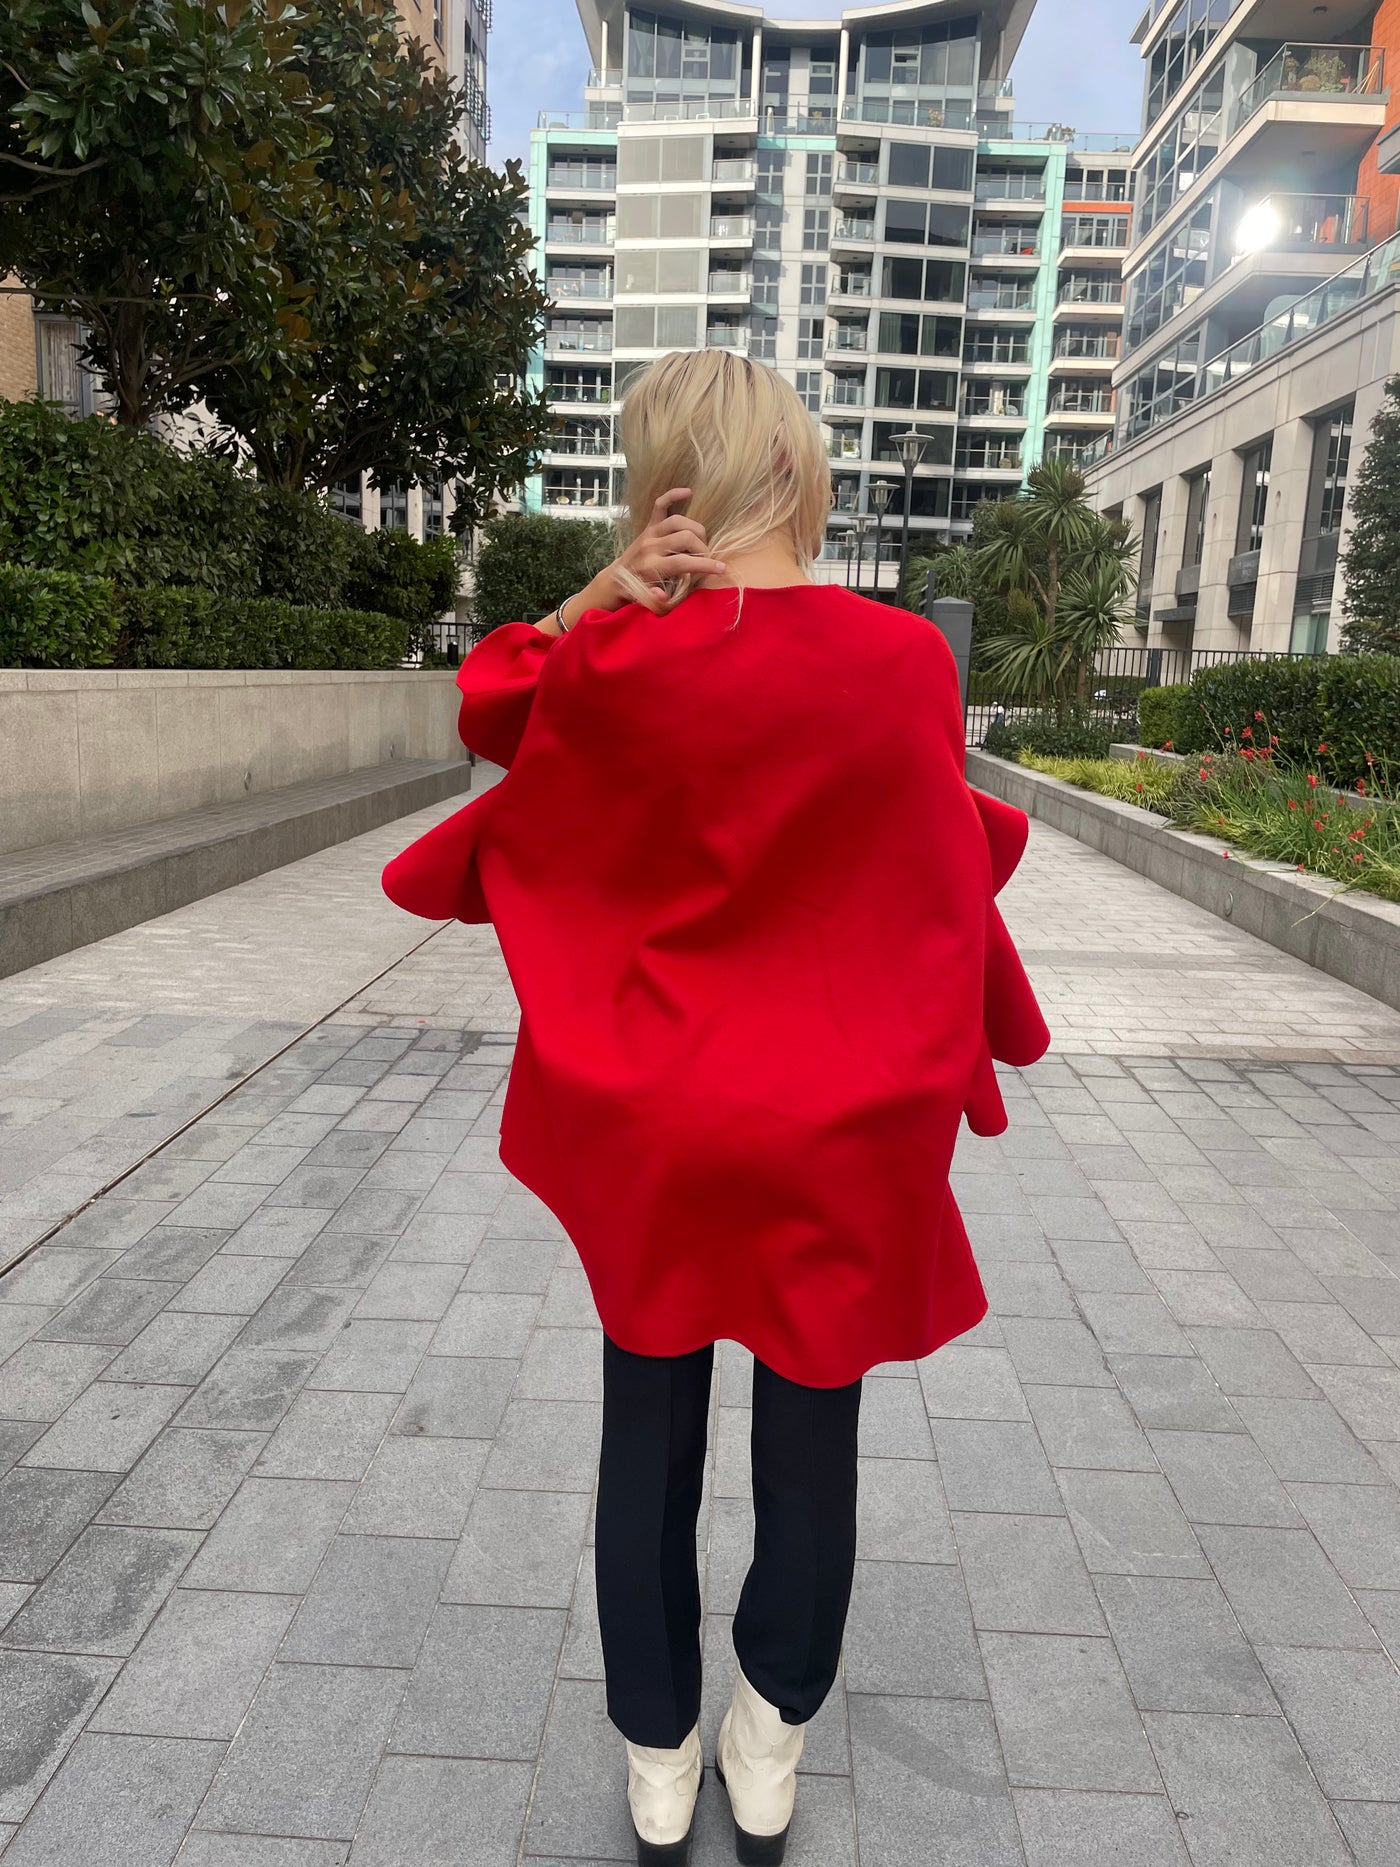 VALENTINO Red Wool ruffles Cape Size 38 RRP: £2300